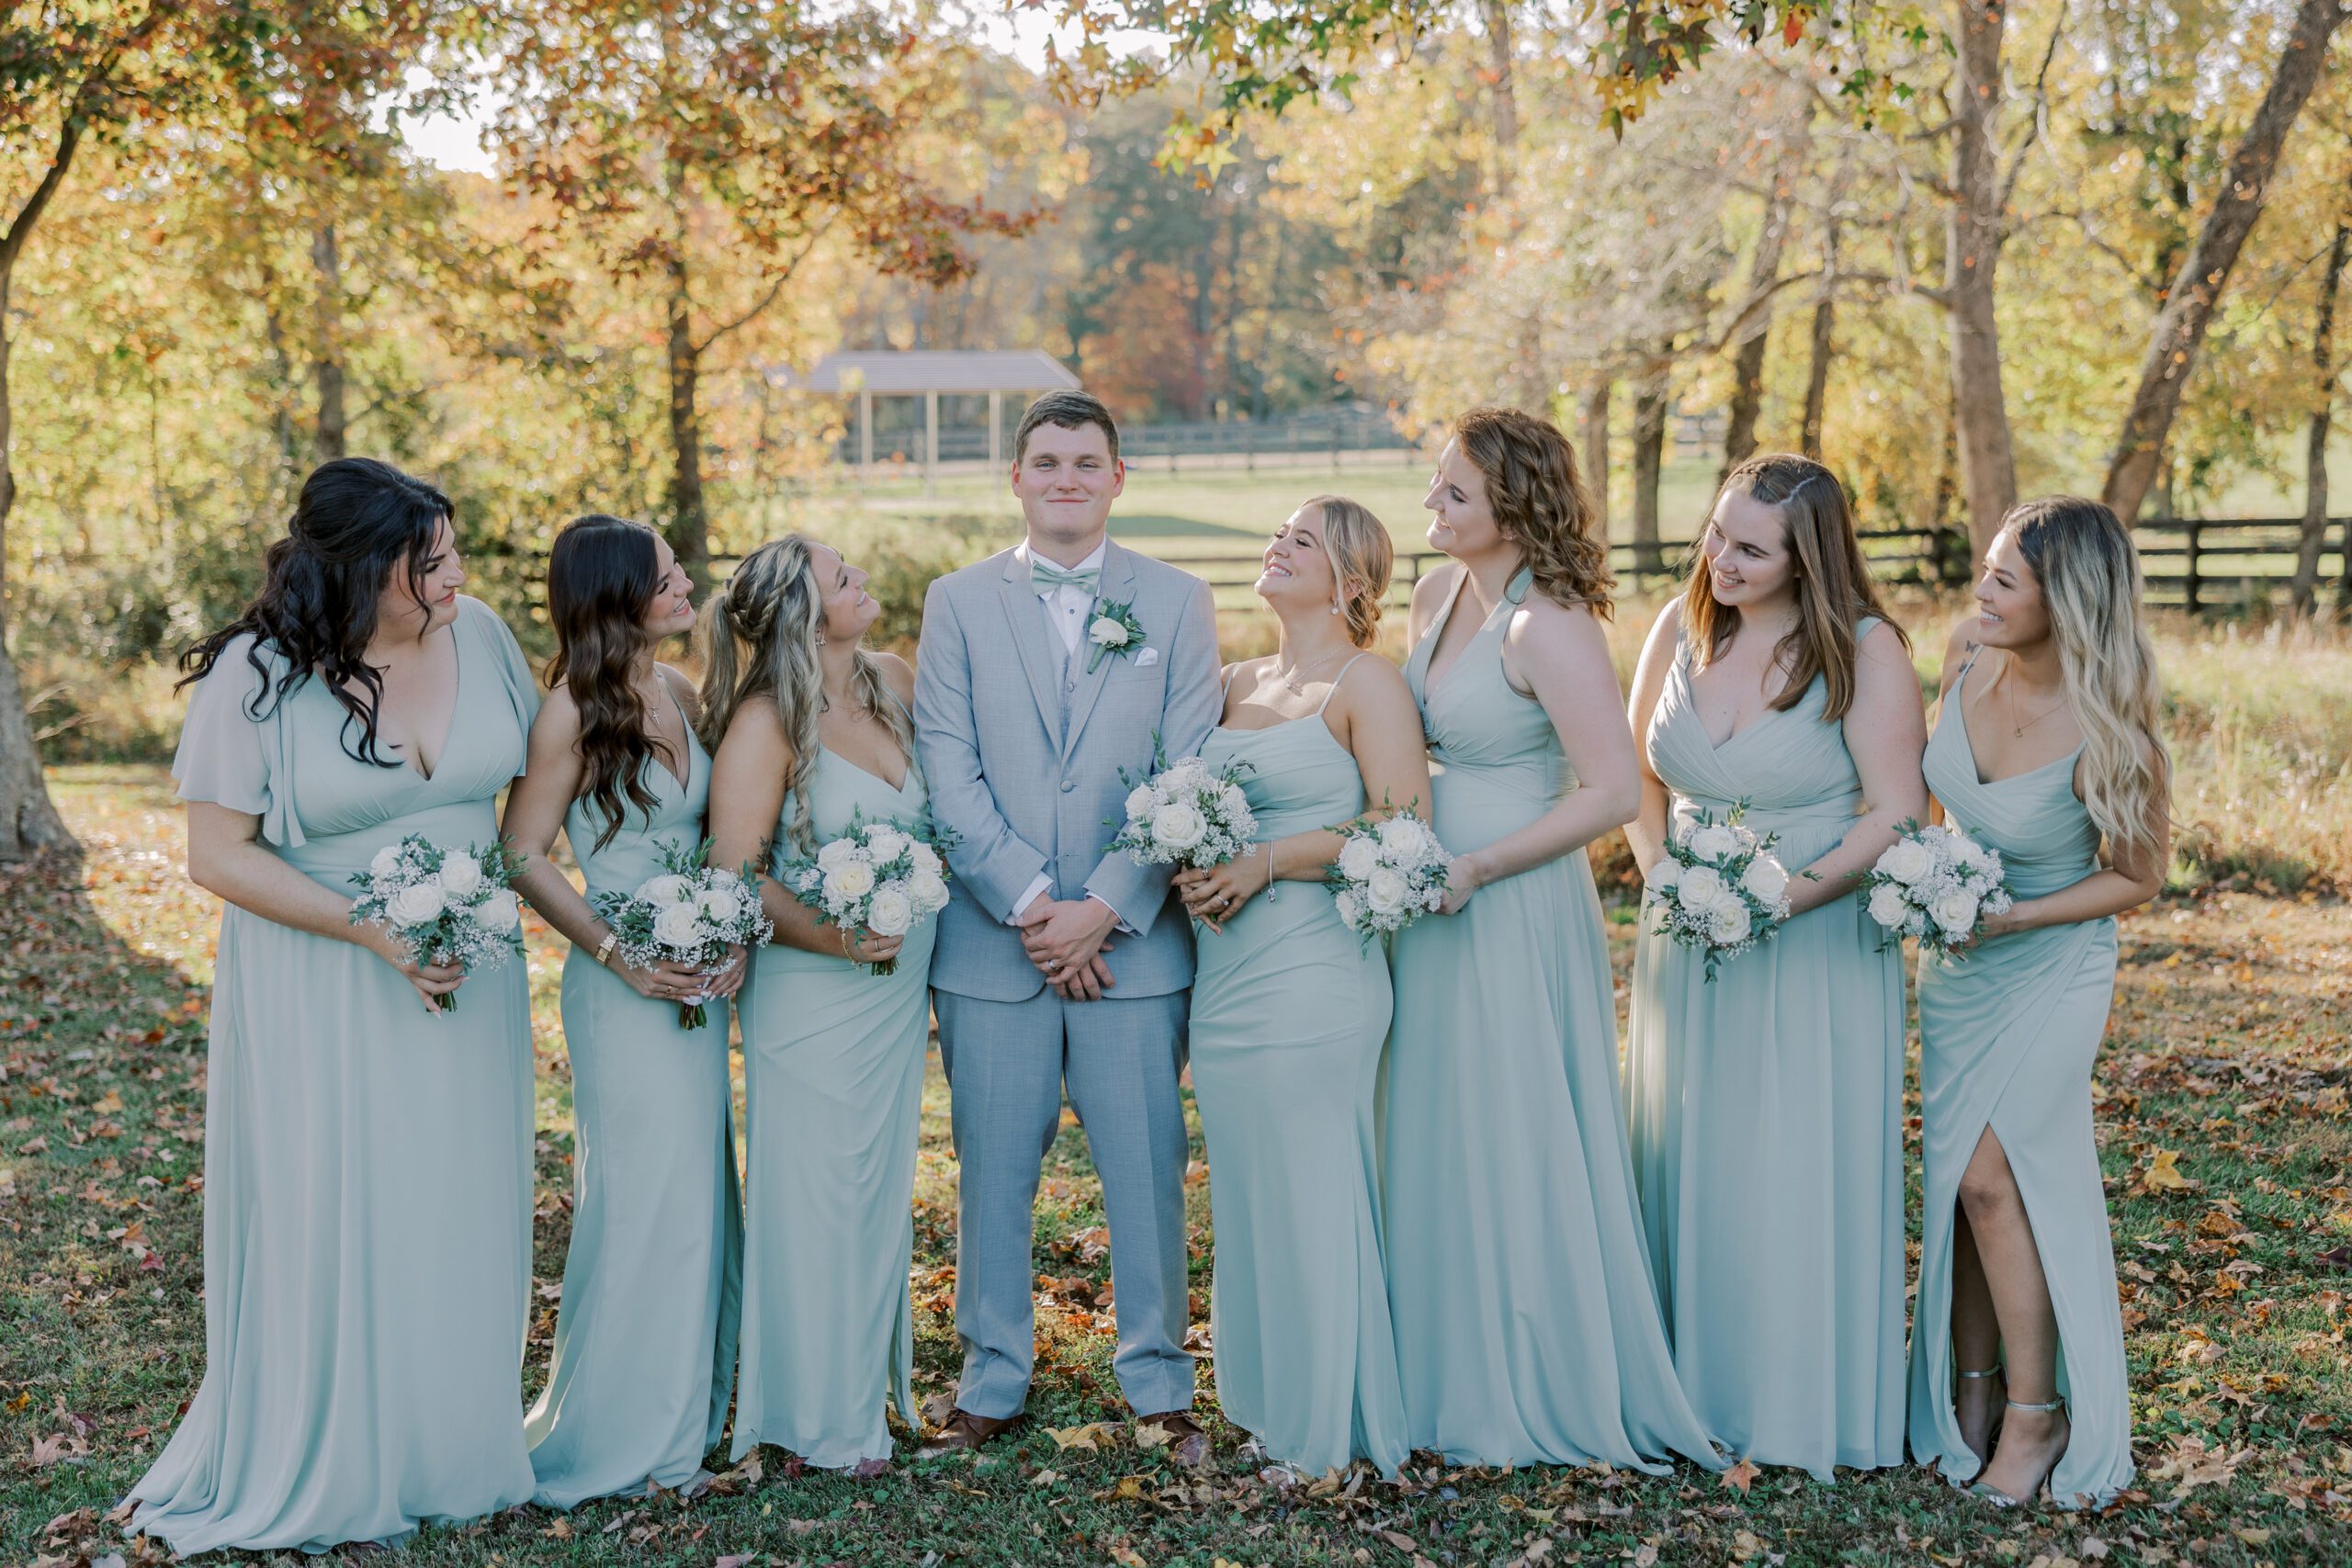 Groom standing in middle of line of bridesmaids who are all smiling at him while he looks forward also smiling